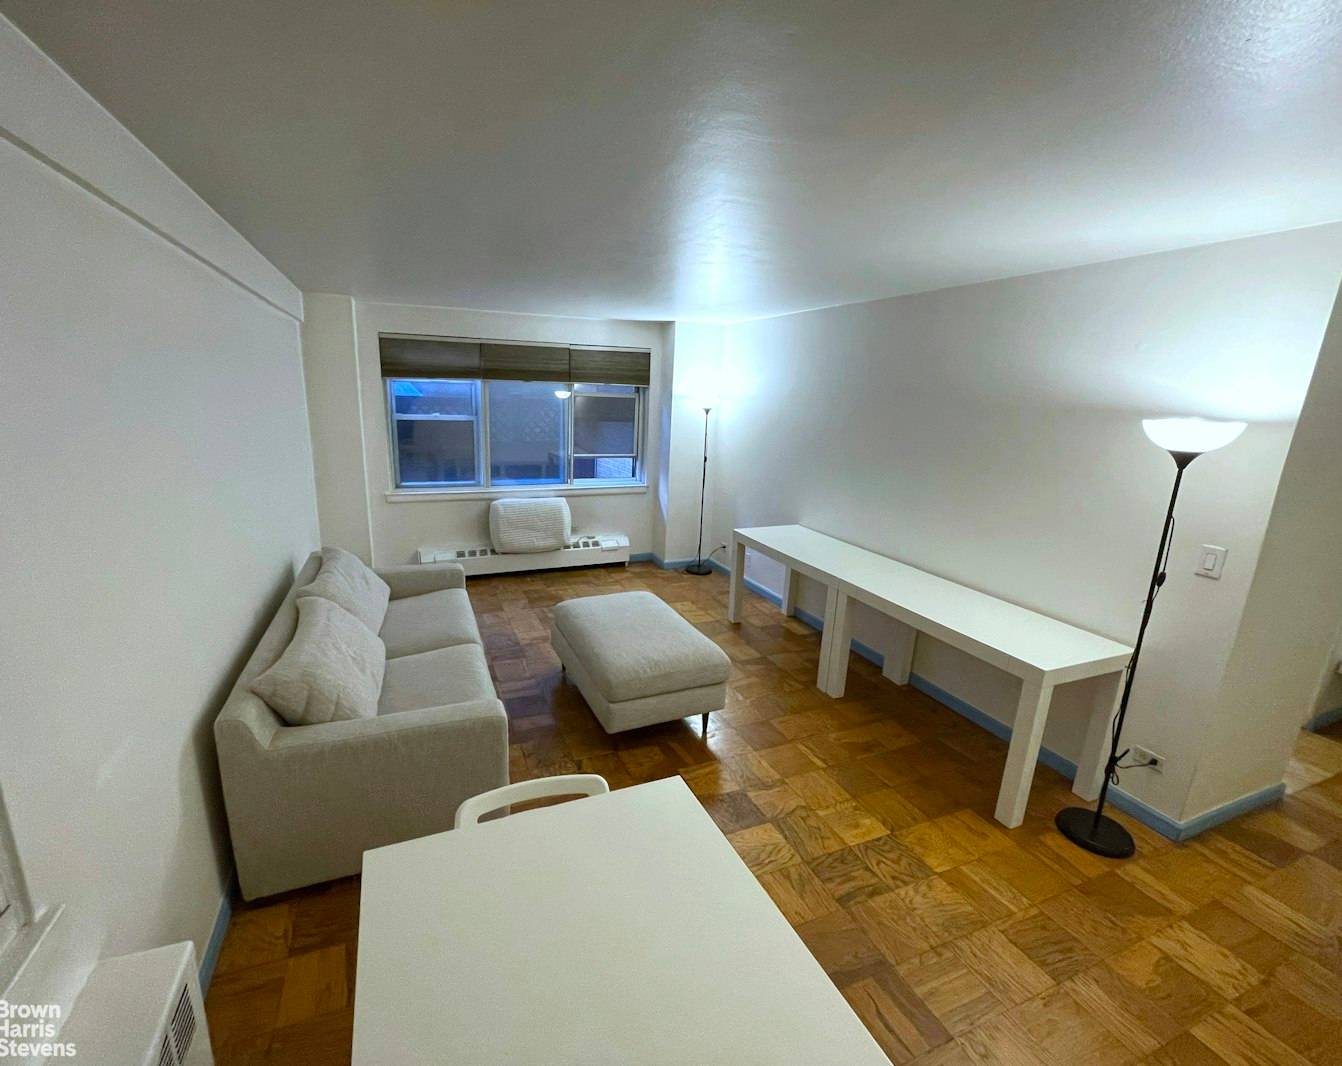 LARGE 1BR HOME IN FULL SERVICE COOPWelcome to Apartment 1P, a very spacious one bedroom, located in a phenomenal, full service Upper East Side co op.